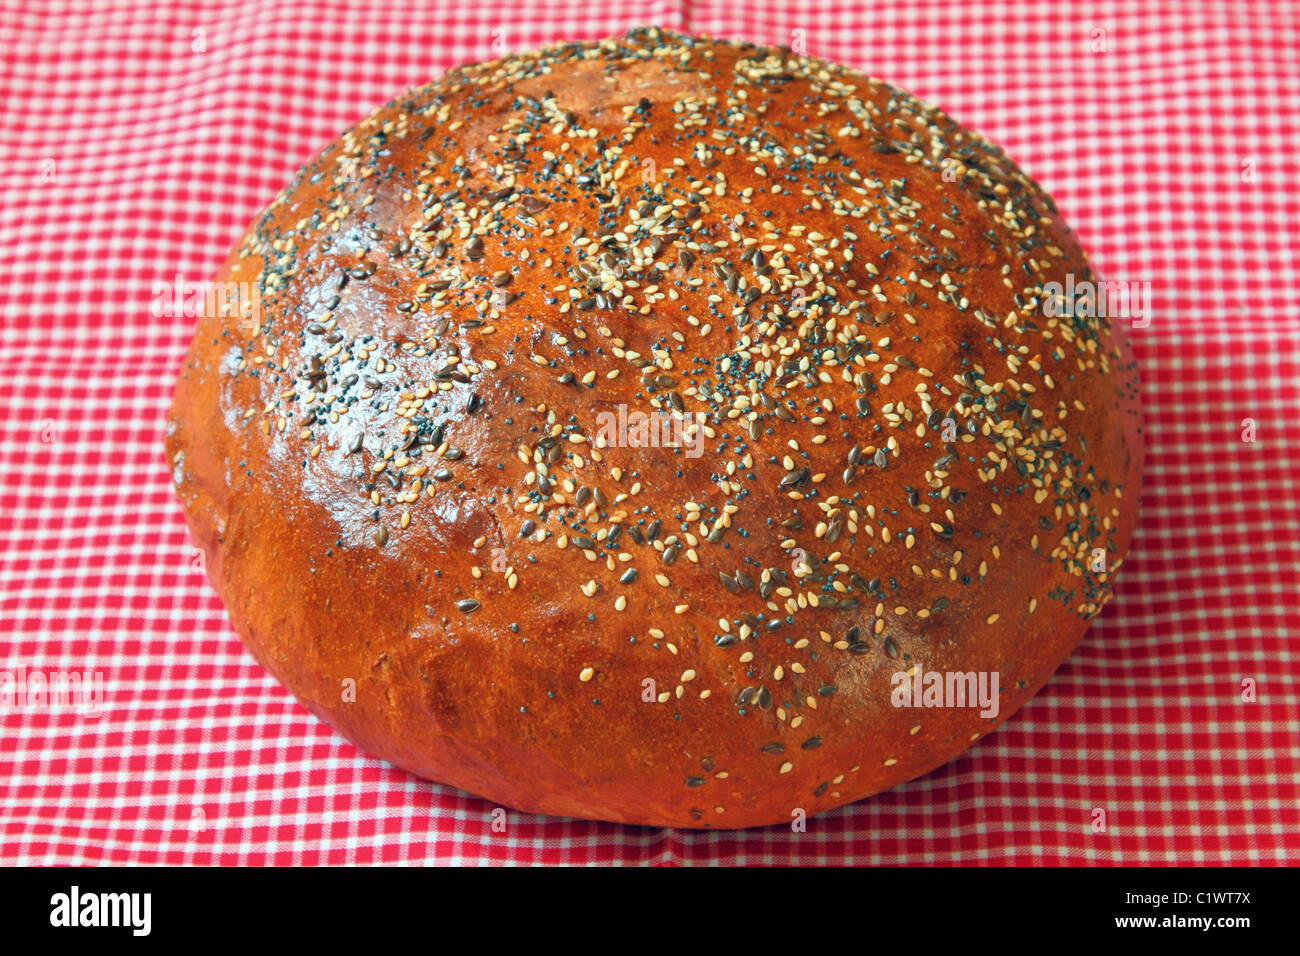 Home made bread freshly baked Stock Photo